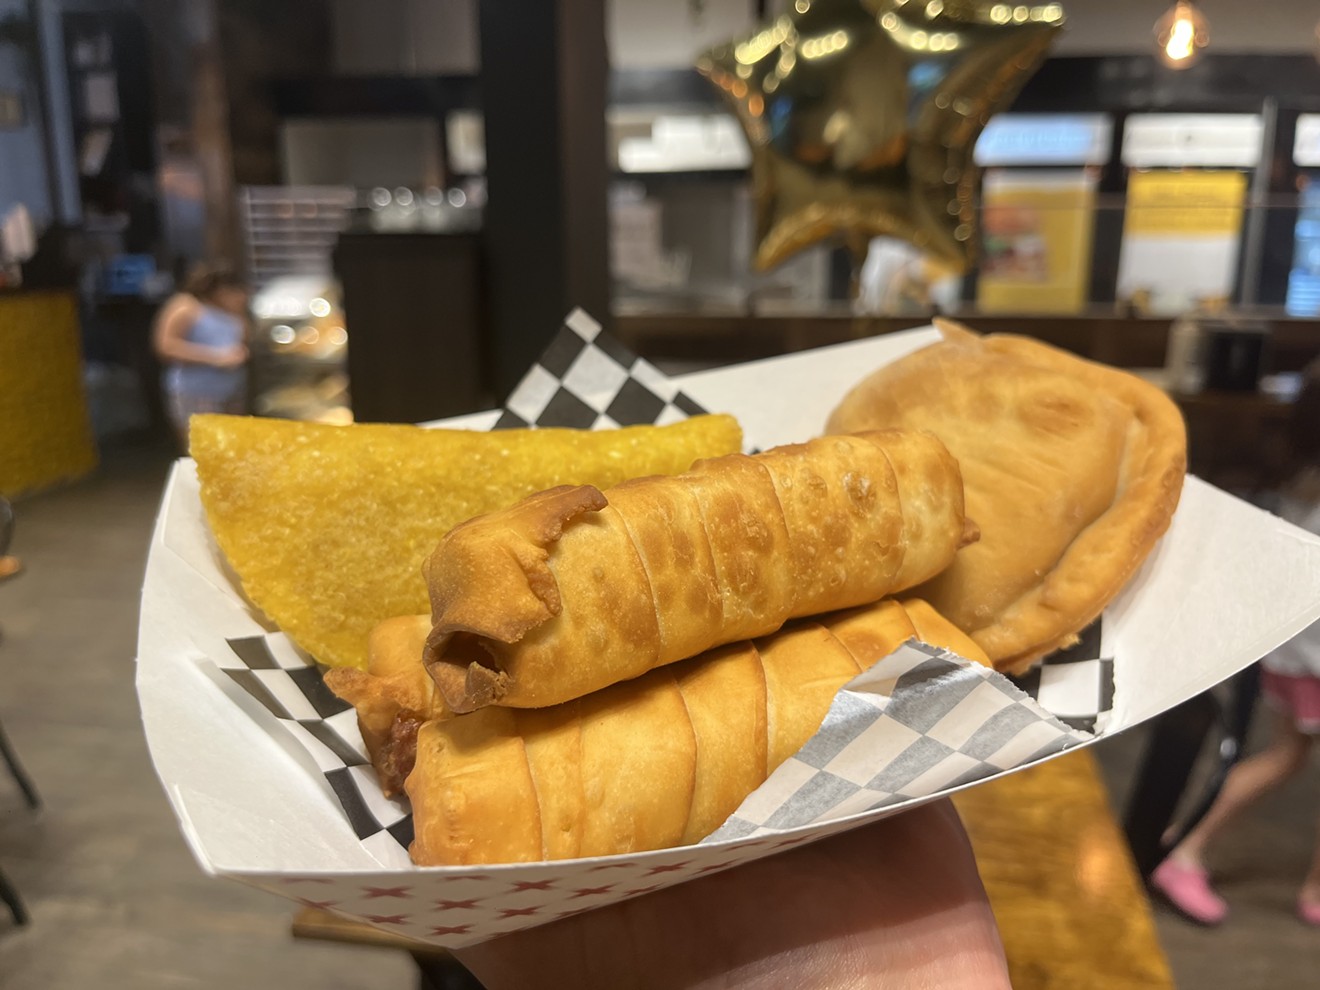 Tequenos, empanadas and pasteles are just some of the fried snacks you can order at the counter.